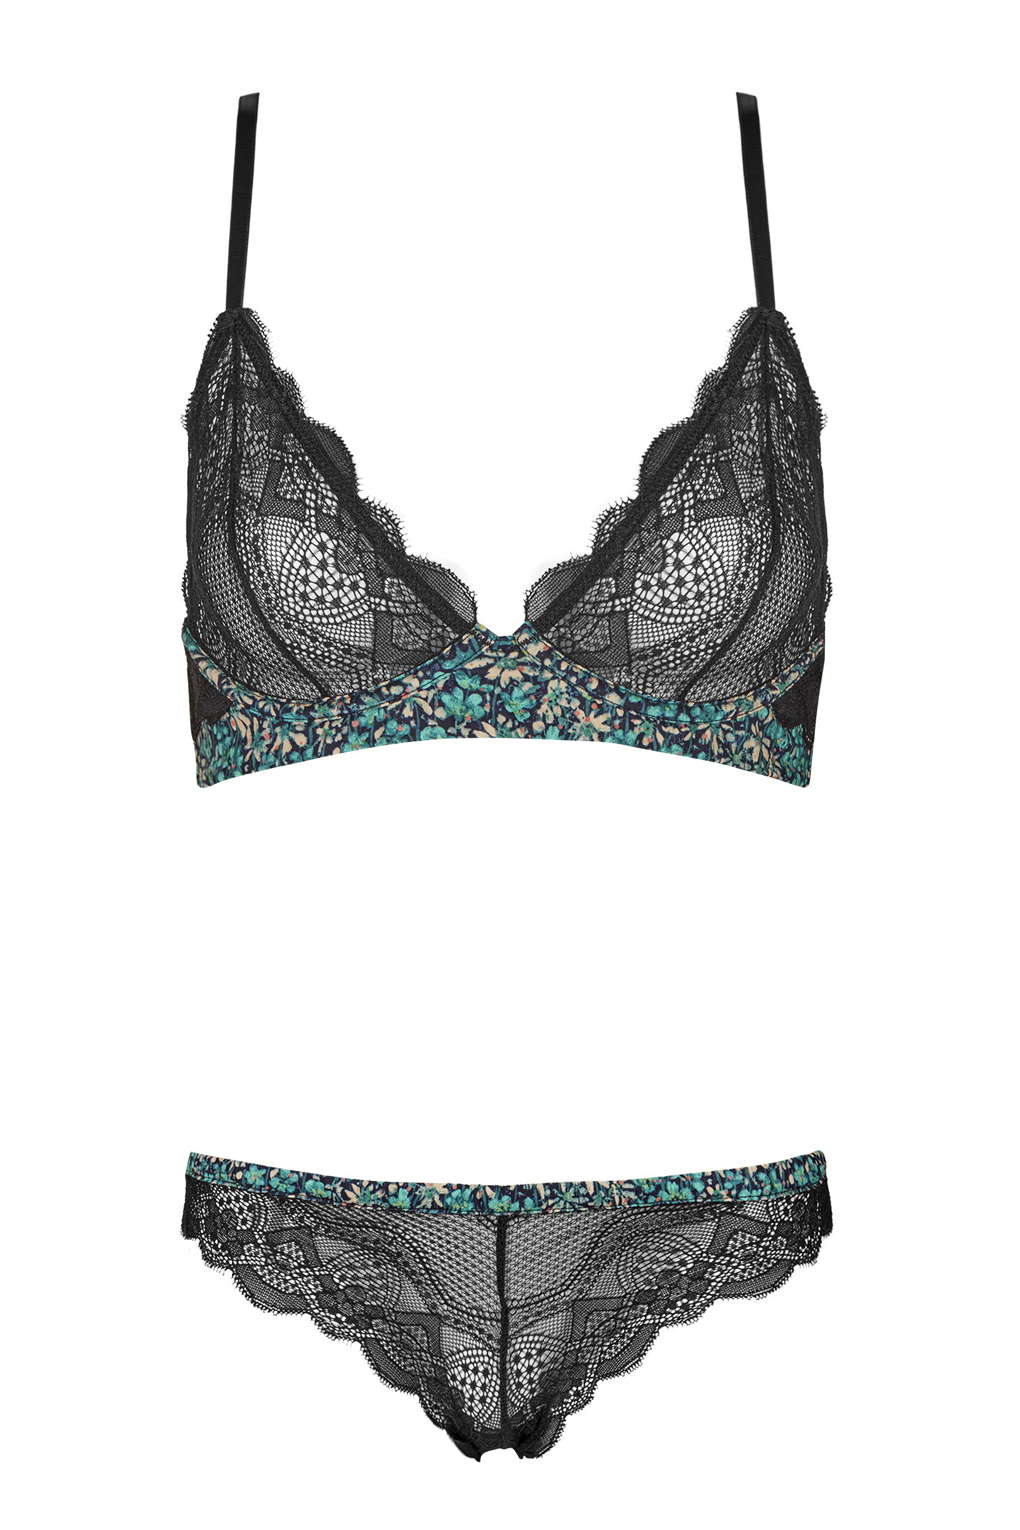 valentines day lingerie to buy